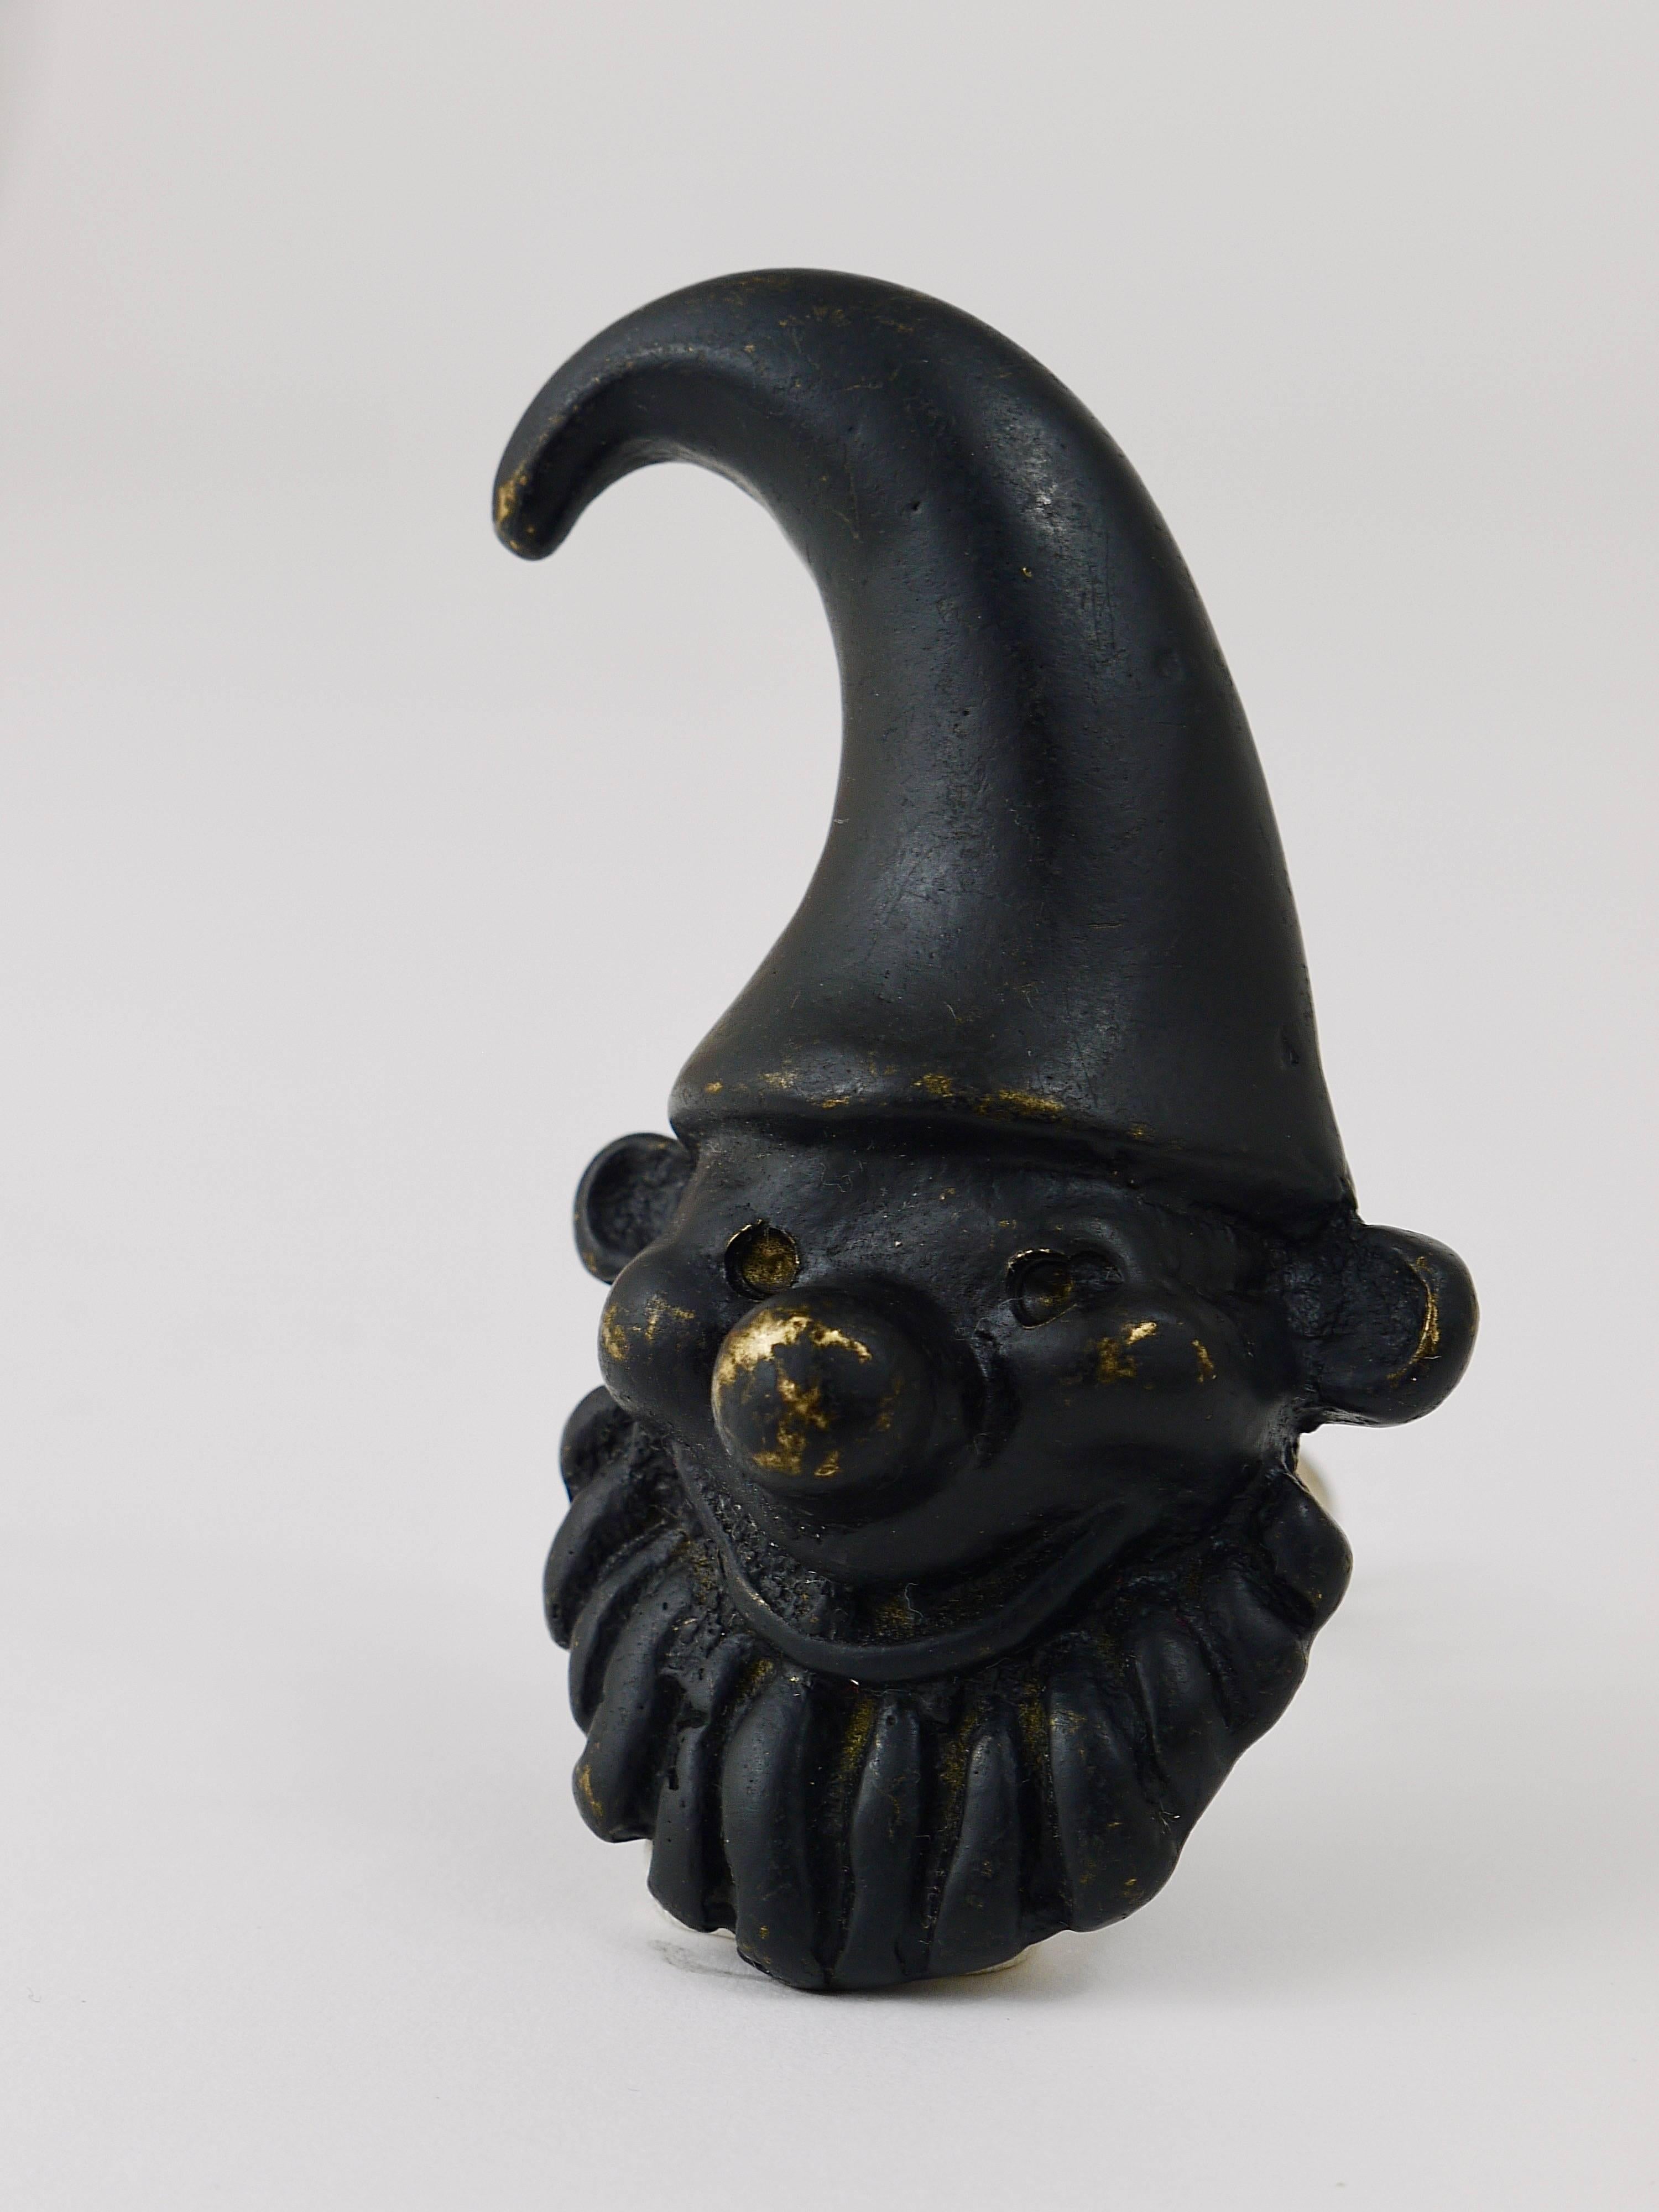 A charming Mid-Century bottle opener/cork screw, displaying a dwarf. A humorous design by Walter Bosse, executed by Hertha Baller Austria in the 1950s. Made of black-finished brass, in good condition.